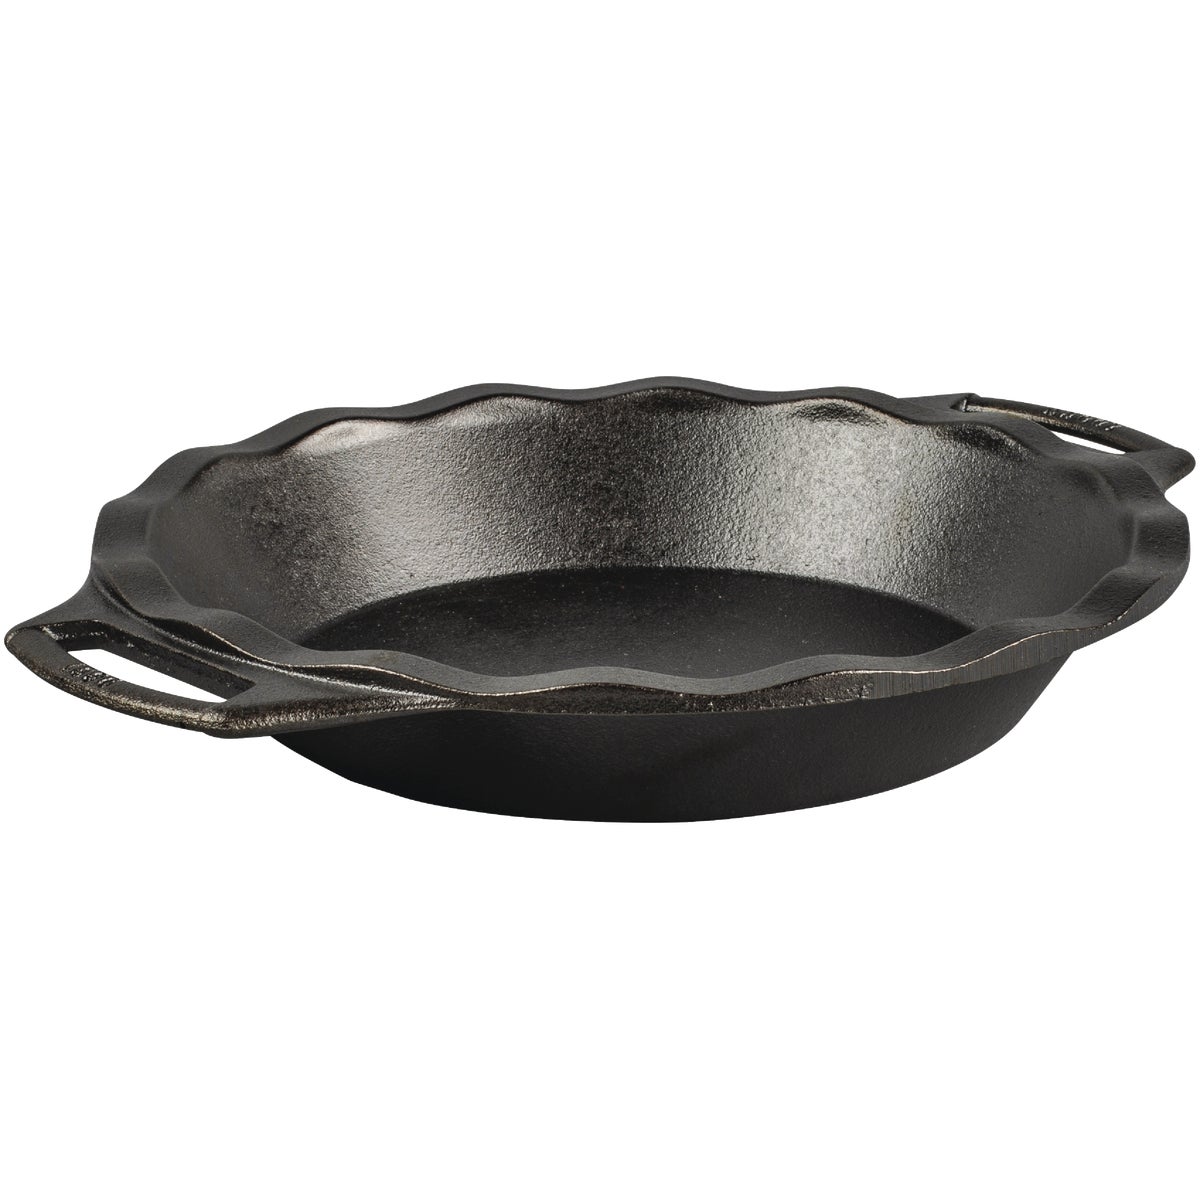 Lodge 9 In. Seasoned Cast Iron Pie Pan with Dual Handles